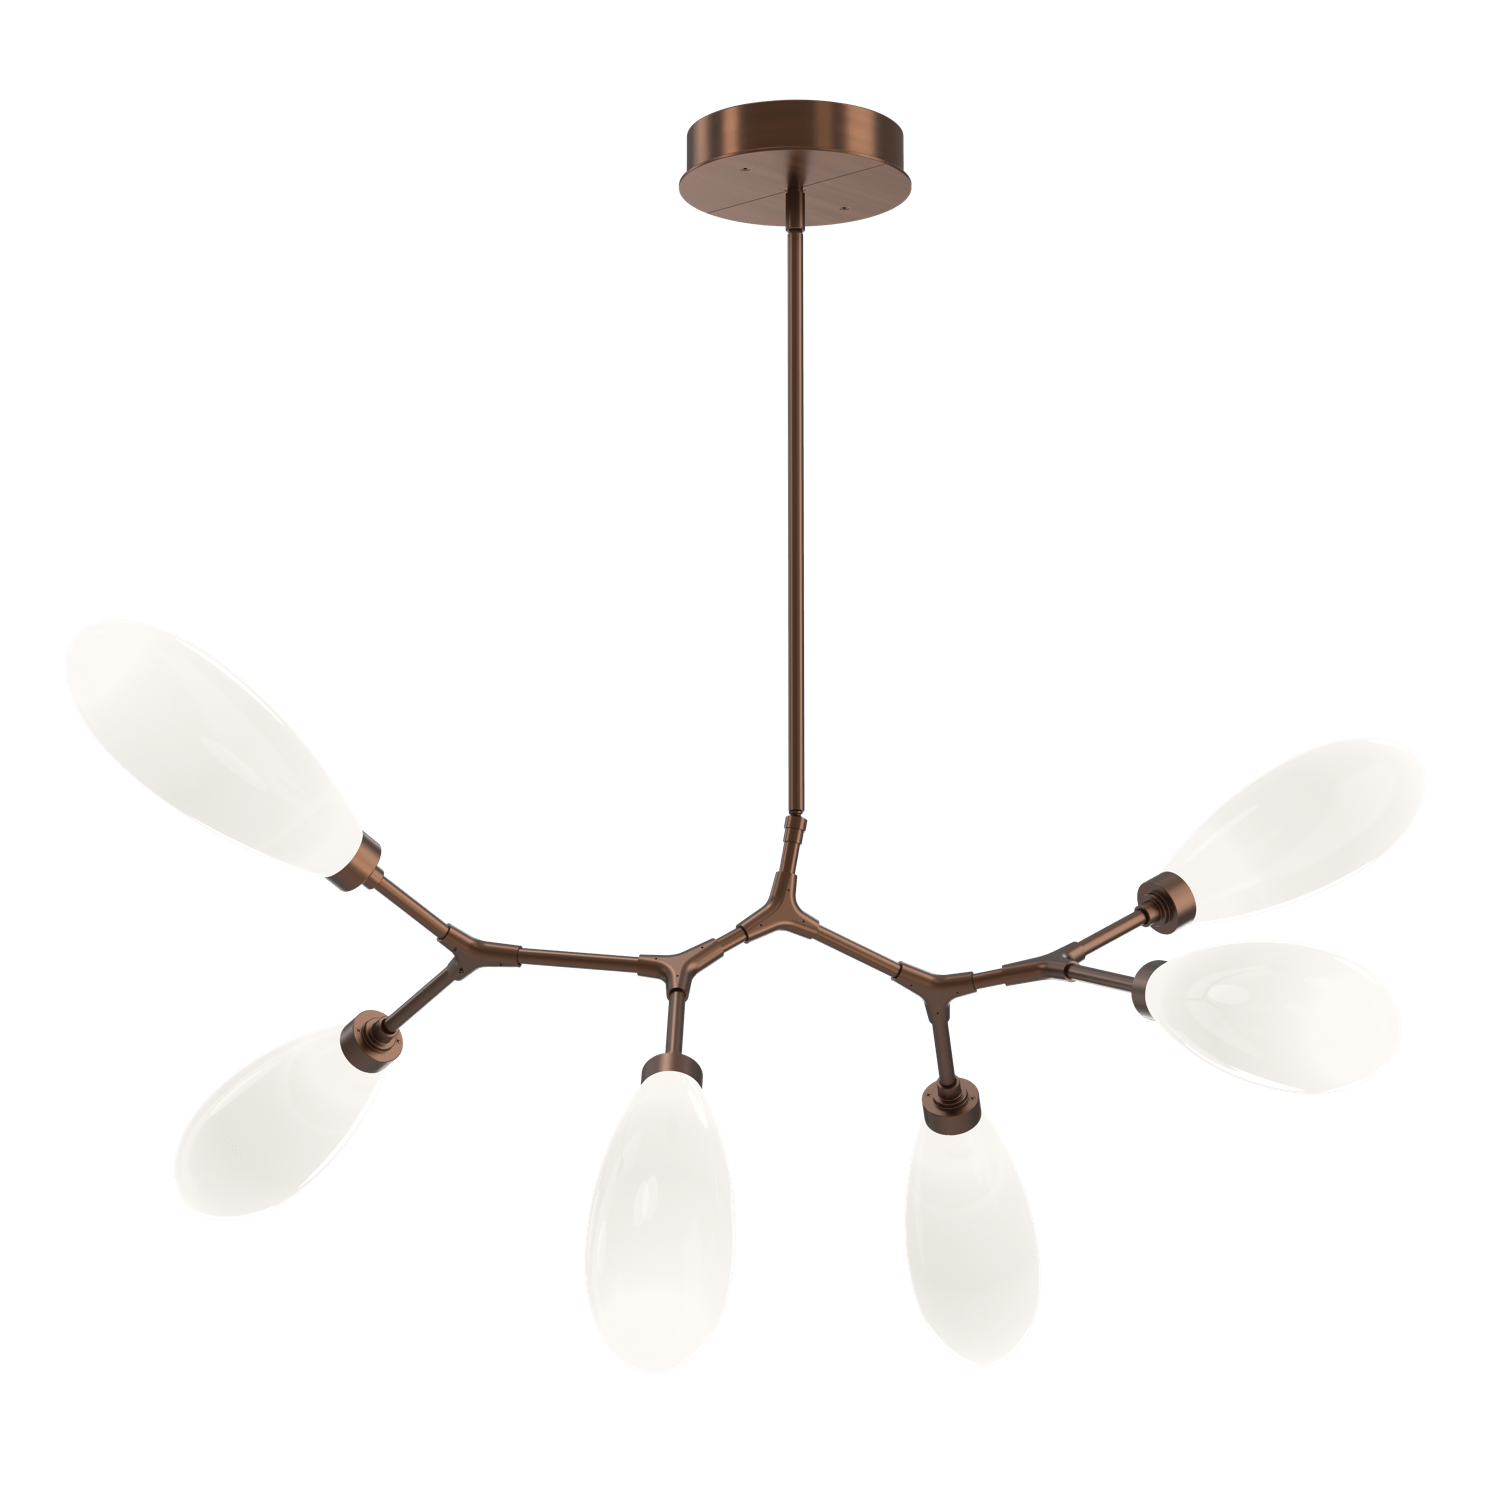 PLB0071-BA-RB-WL-LL-Hammerton-Studio-Fiori-6-light-organic-branch-chandelier-with-oil-rubbed-bronze-finish-and-opal-white-glass-shades-and-LED-lamping